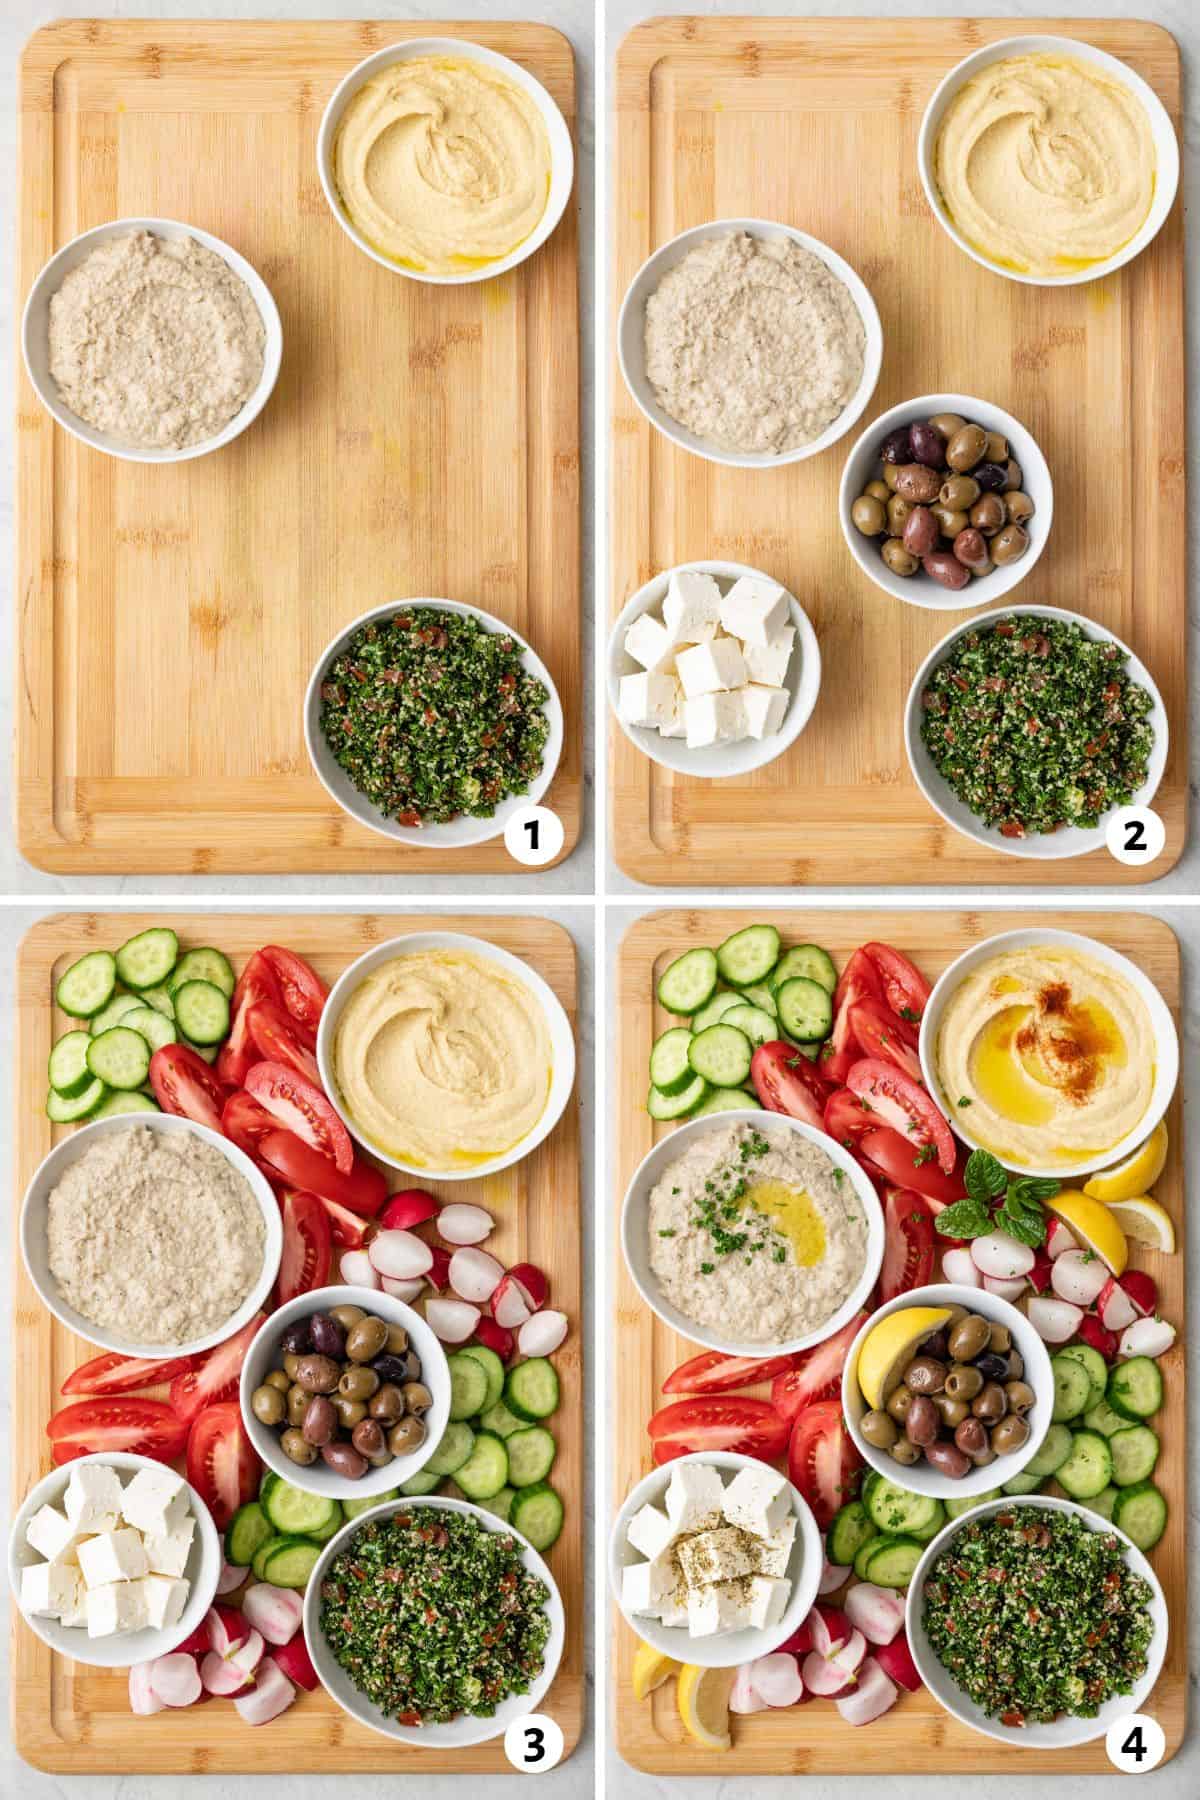 4 image collage building appetizer board: 1- adding small bowls of each hummus, baba ghanoush, and tabbouleh, 2- adding a small bowl of mixed olives and feta cubes, 3- spreading prepped veggies in between bowls, and 4- final garnishes added to dips and lemon wedges added.